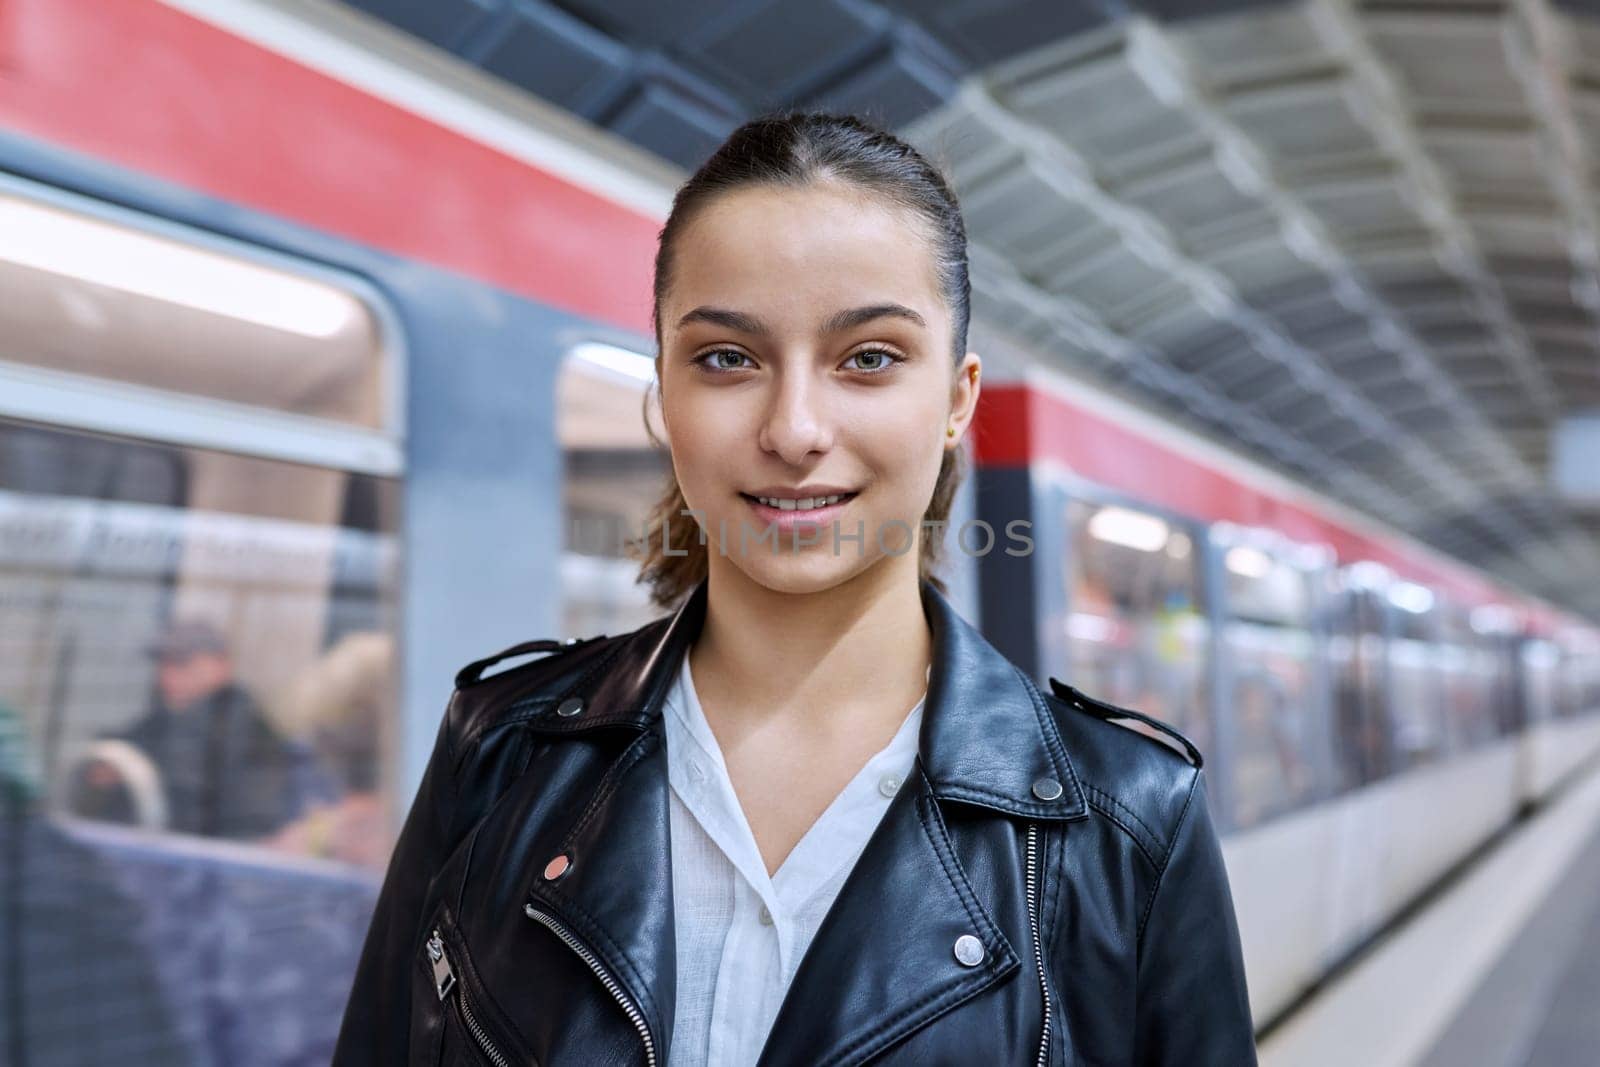 Teenage girl on platform of subway station, against backdrop of subway train, smiling beautiful female looking at camera. Student teenager youth, lifestyle in city, subway passengers, urban transport